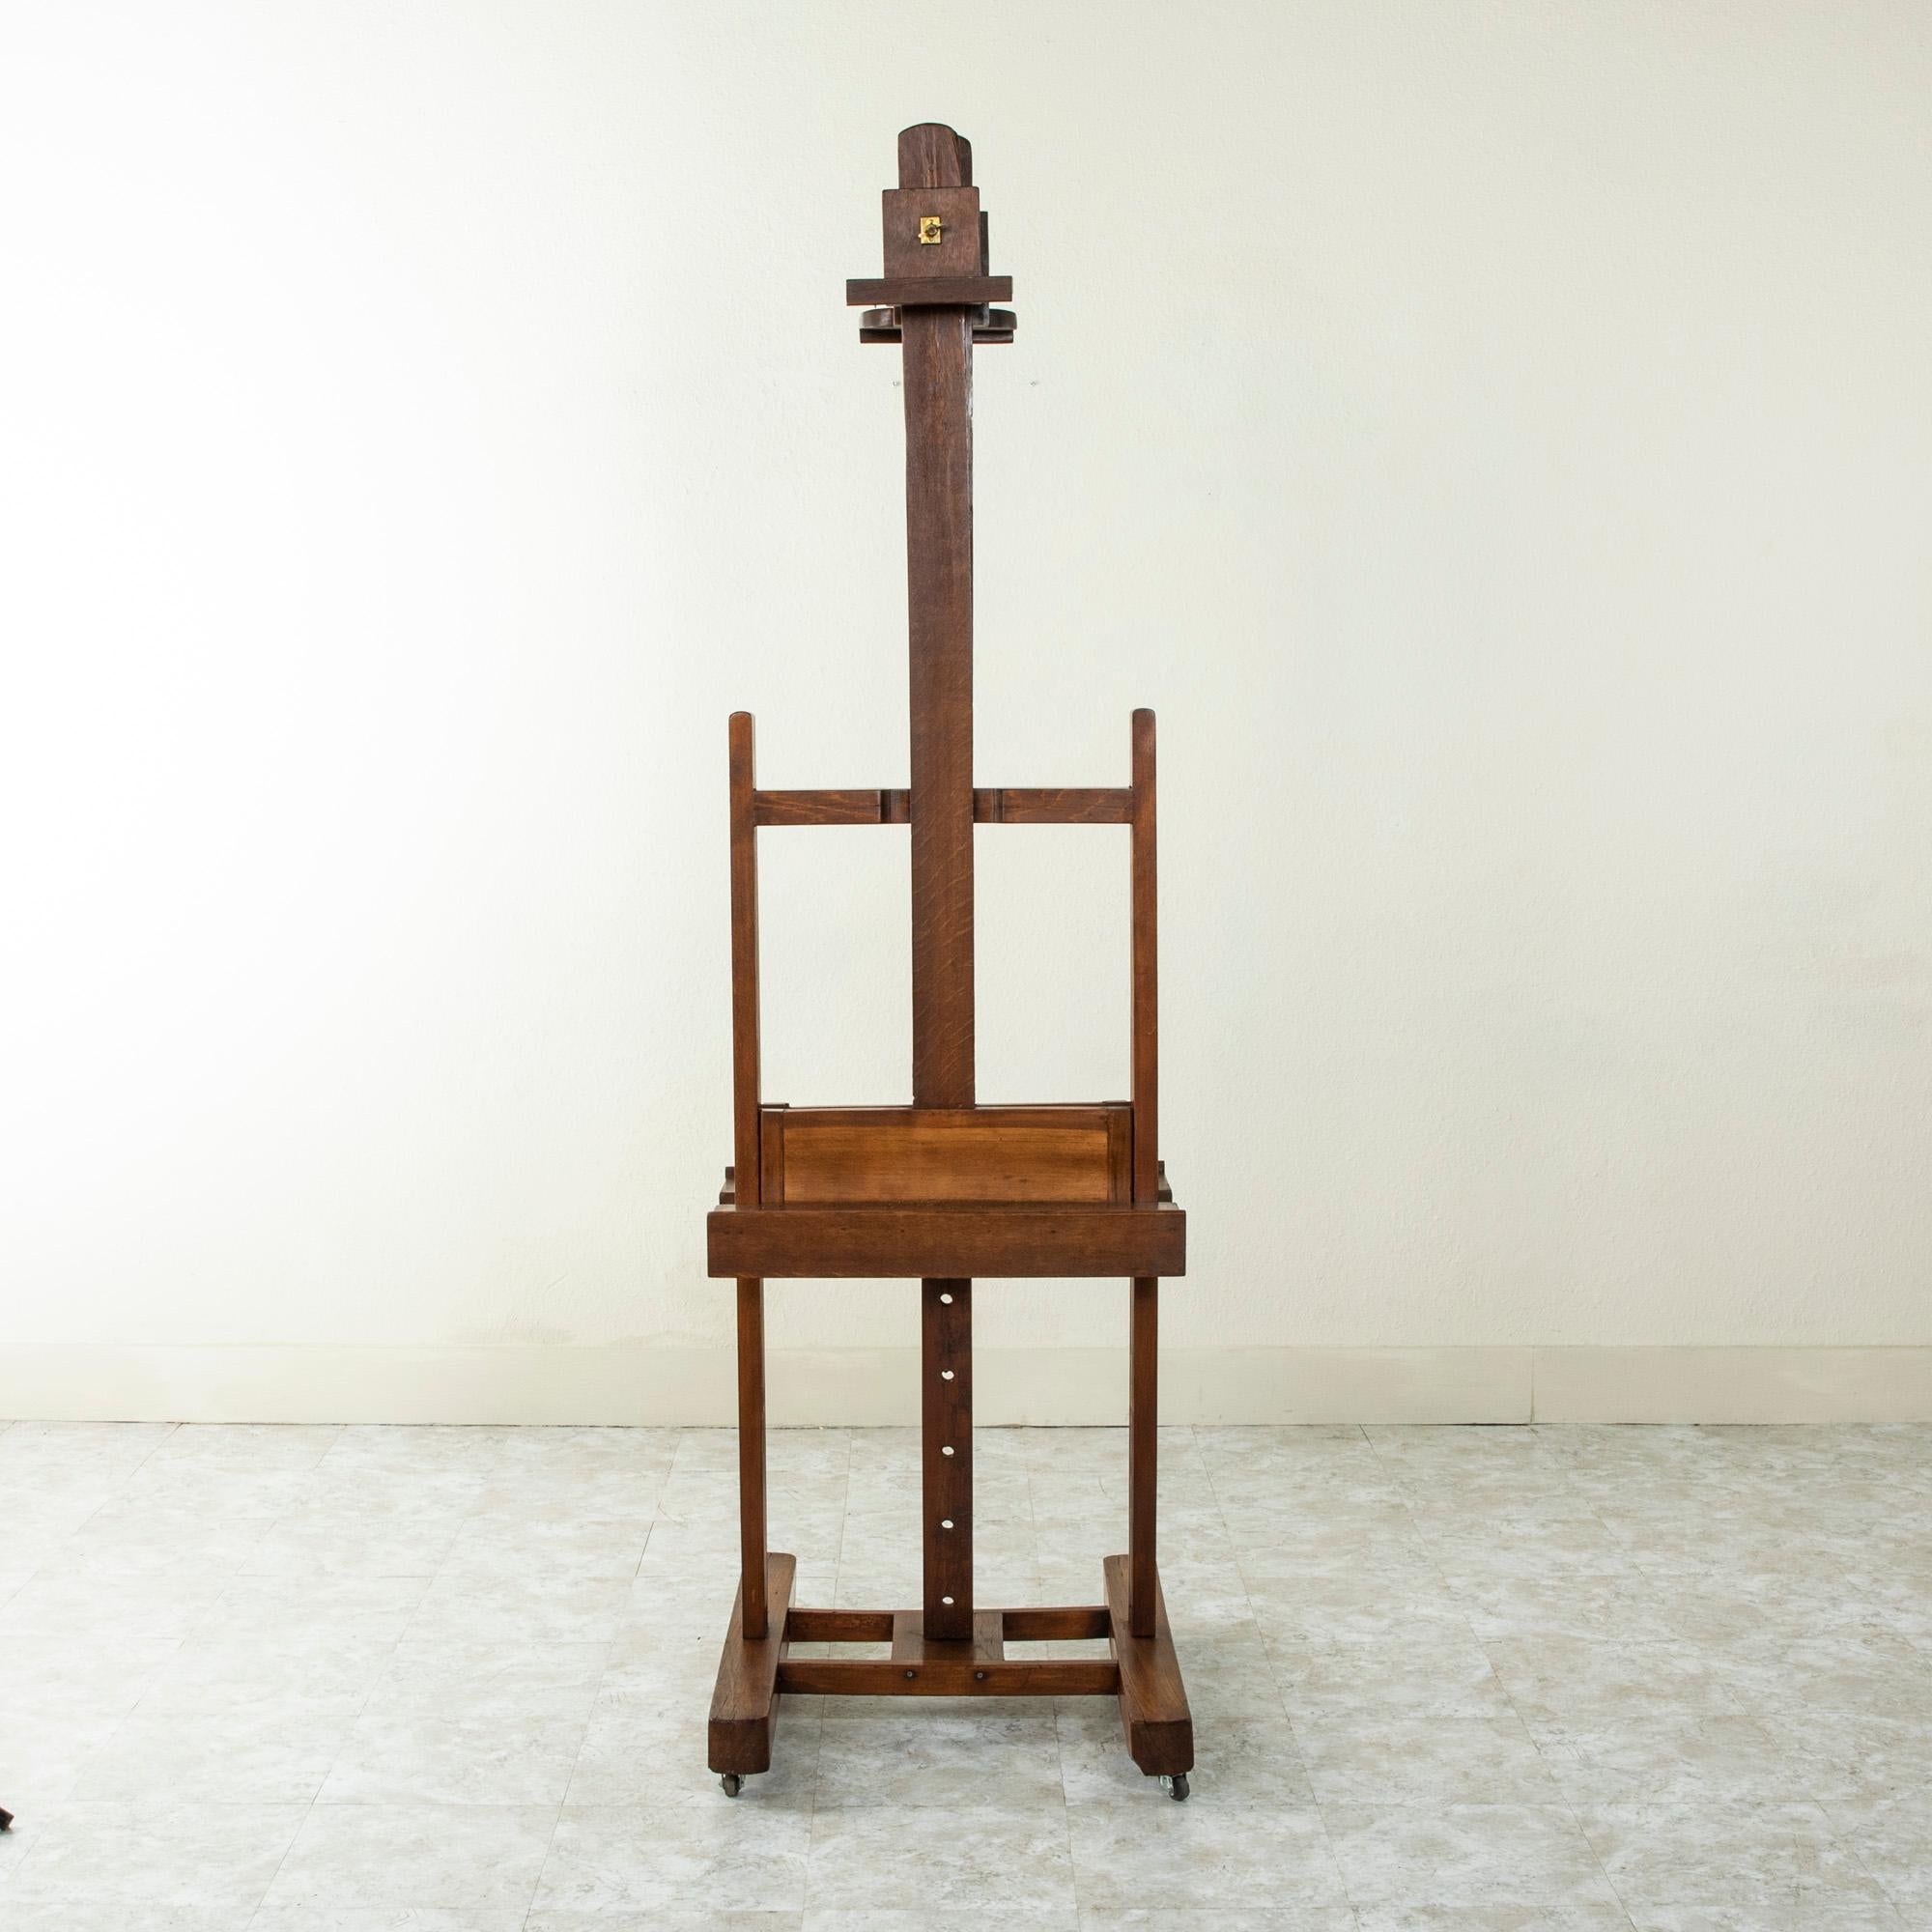 This large French oak and walnut floor easel from the late nineteenth century is double faced, allowing for display of a painting on each side. An iron lever allows for an adjustable height of each tray ranging from 60.5 to 92.5 inches. The five